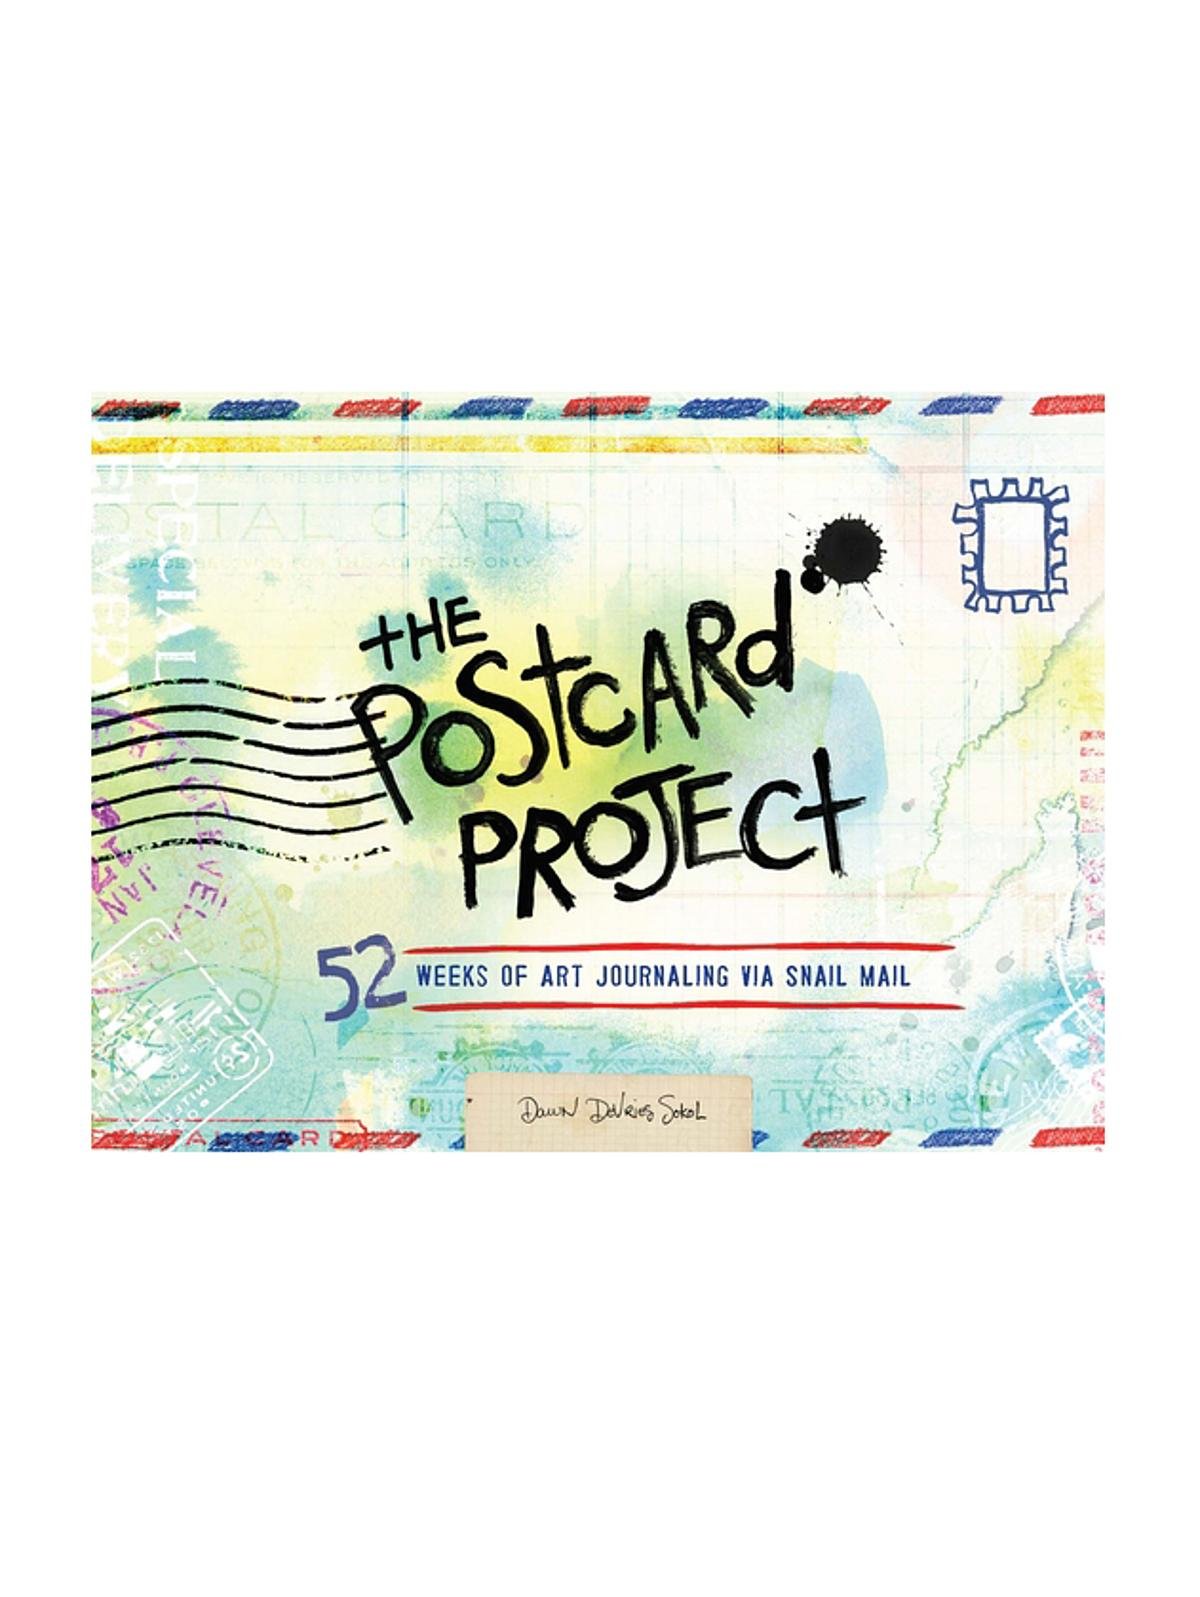 The Postcard Project